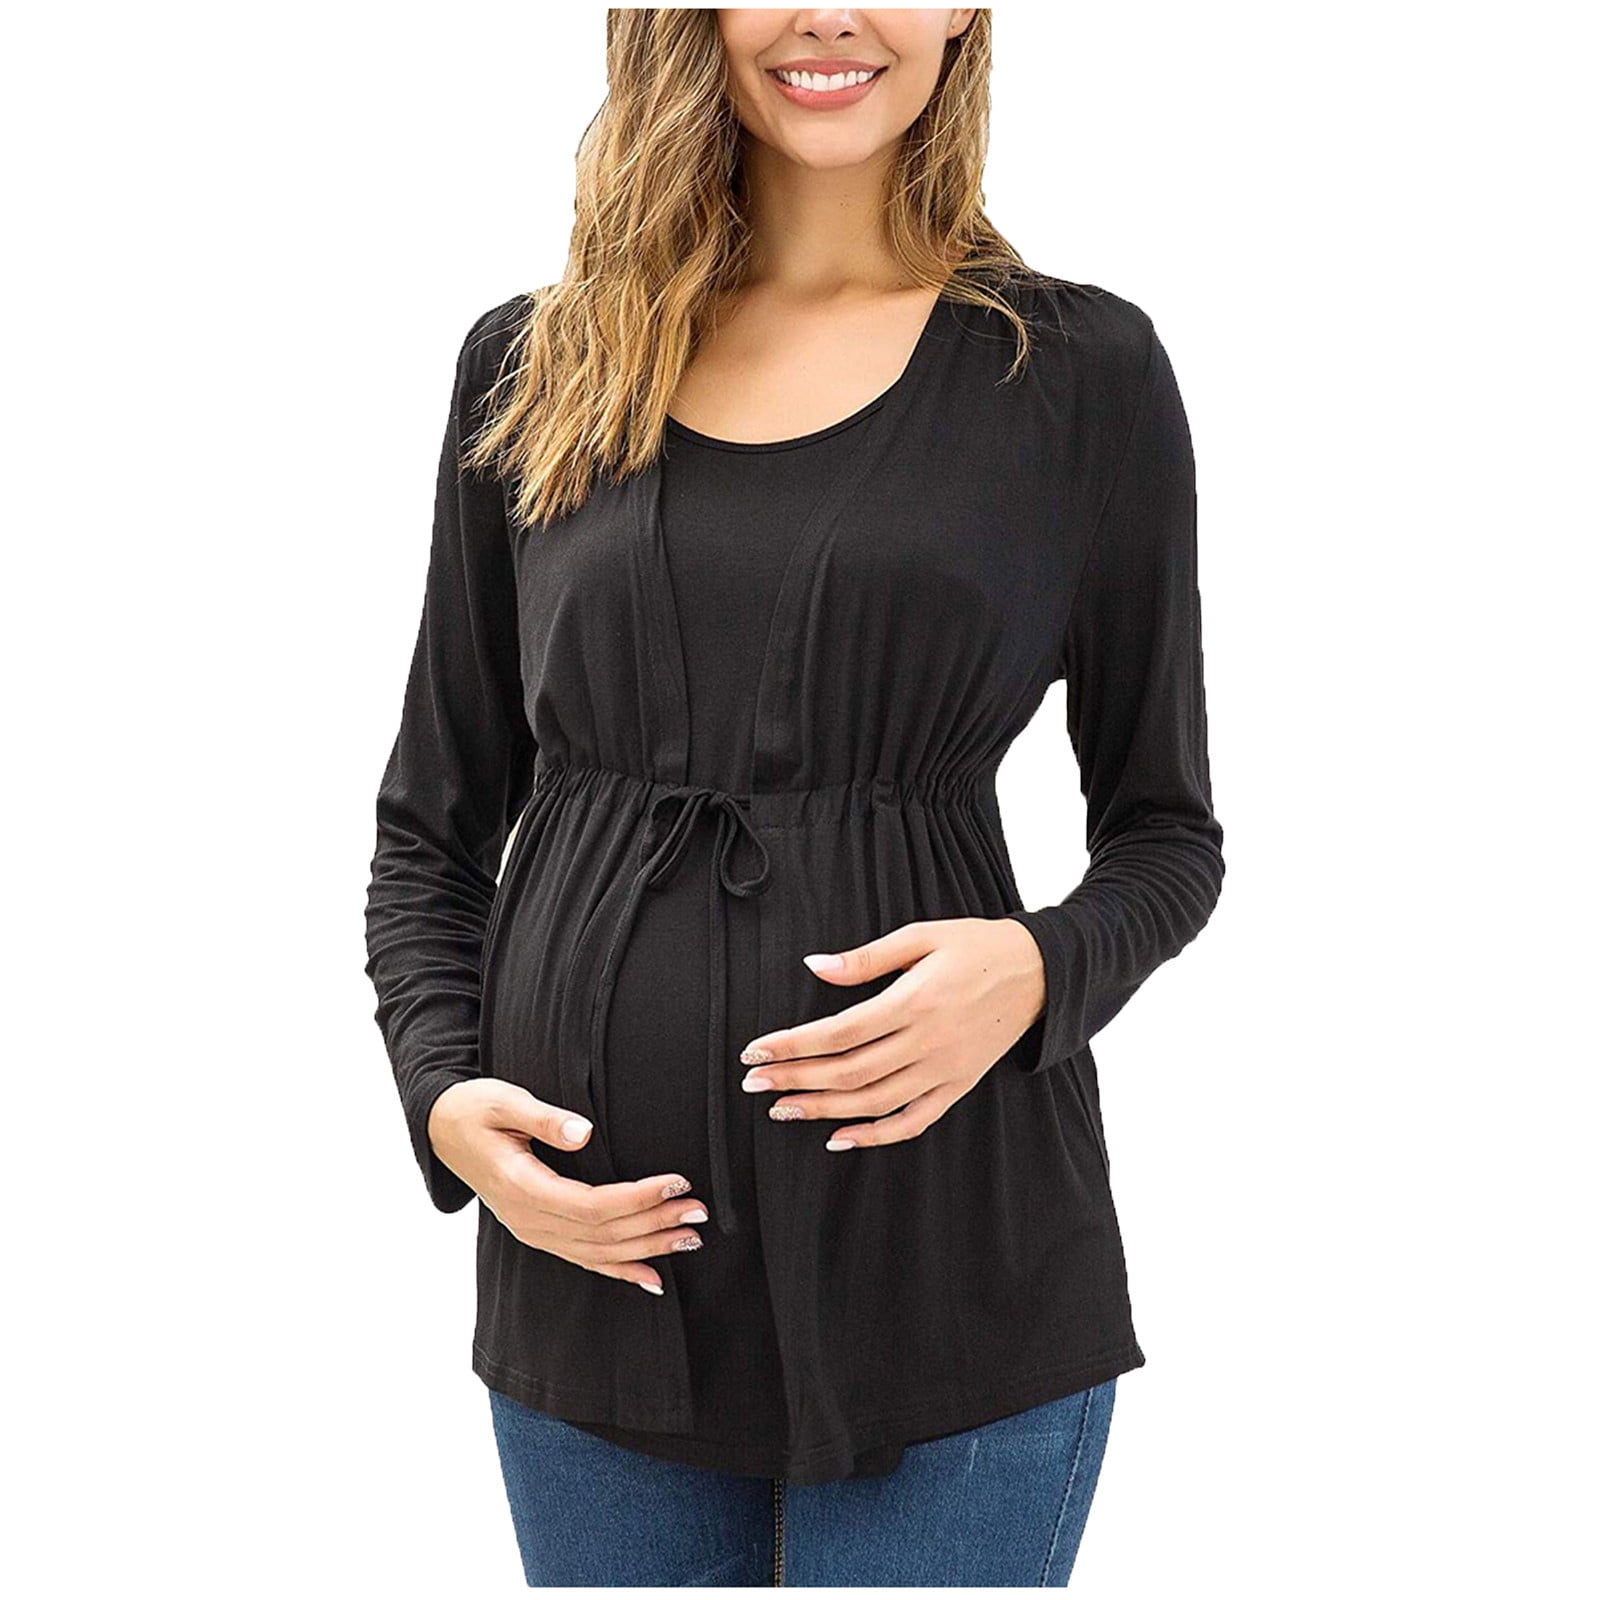 Taqqpue Womens Maternity Nursing Tops Long Sleeve Round Neck Lace